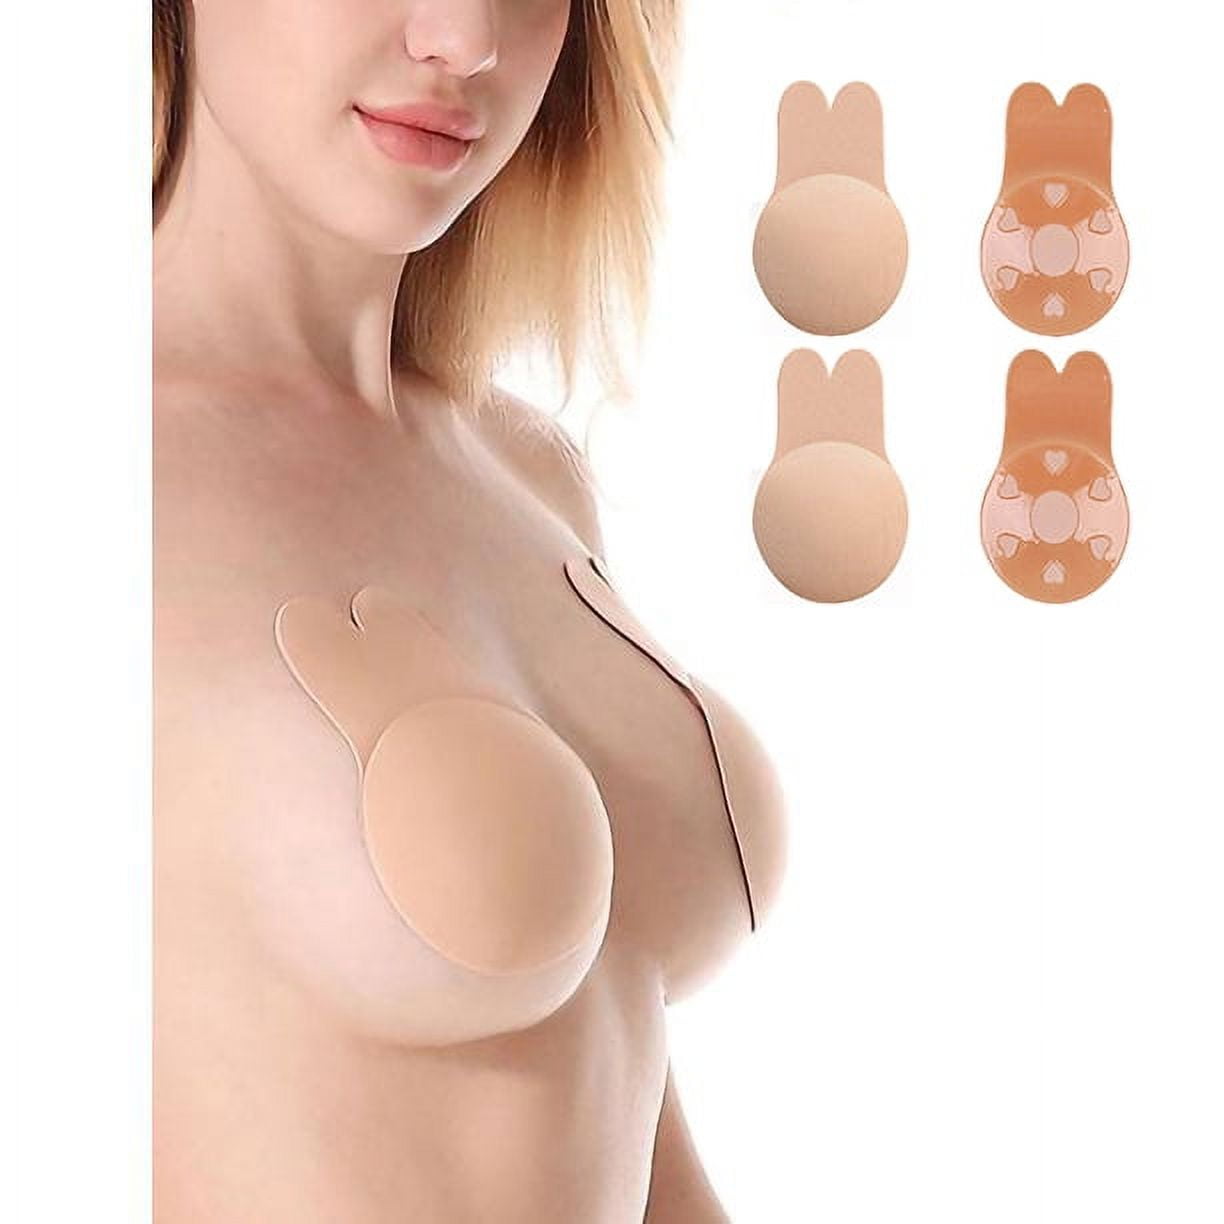 Perk Up: adhesive breast lift tape better than strapless backless